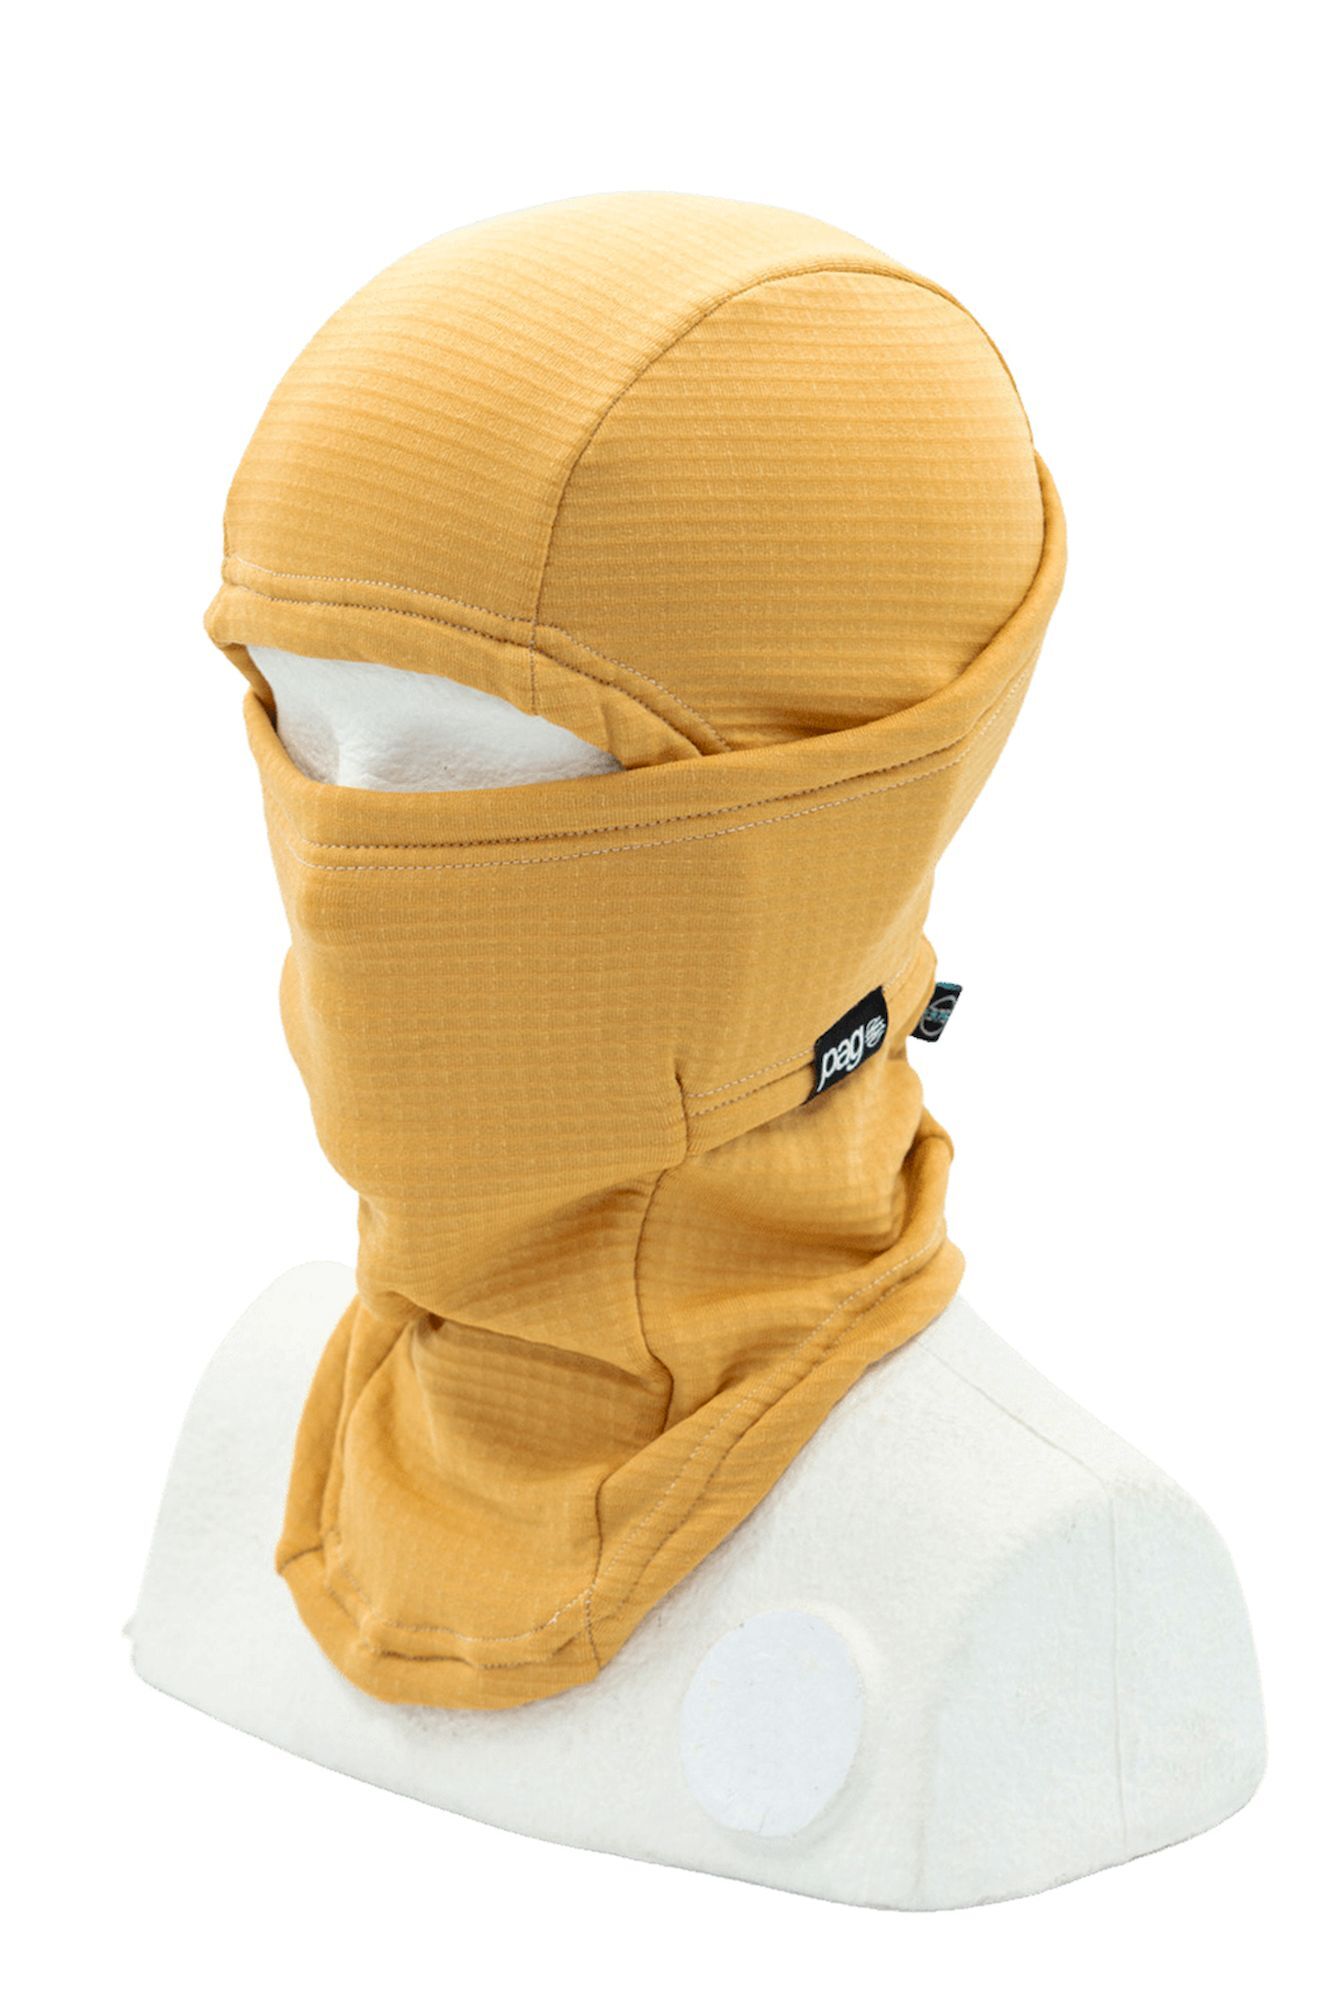 PAG Neckwear Balaclava Fit Pro Micro WR - Cagoule | Hardloop